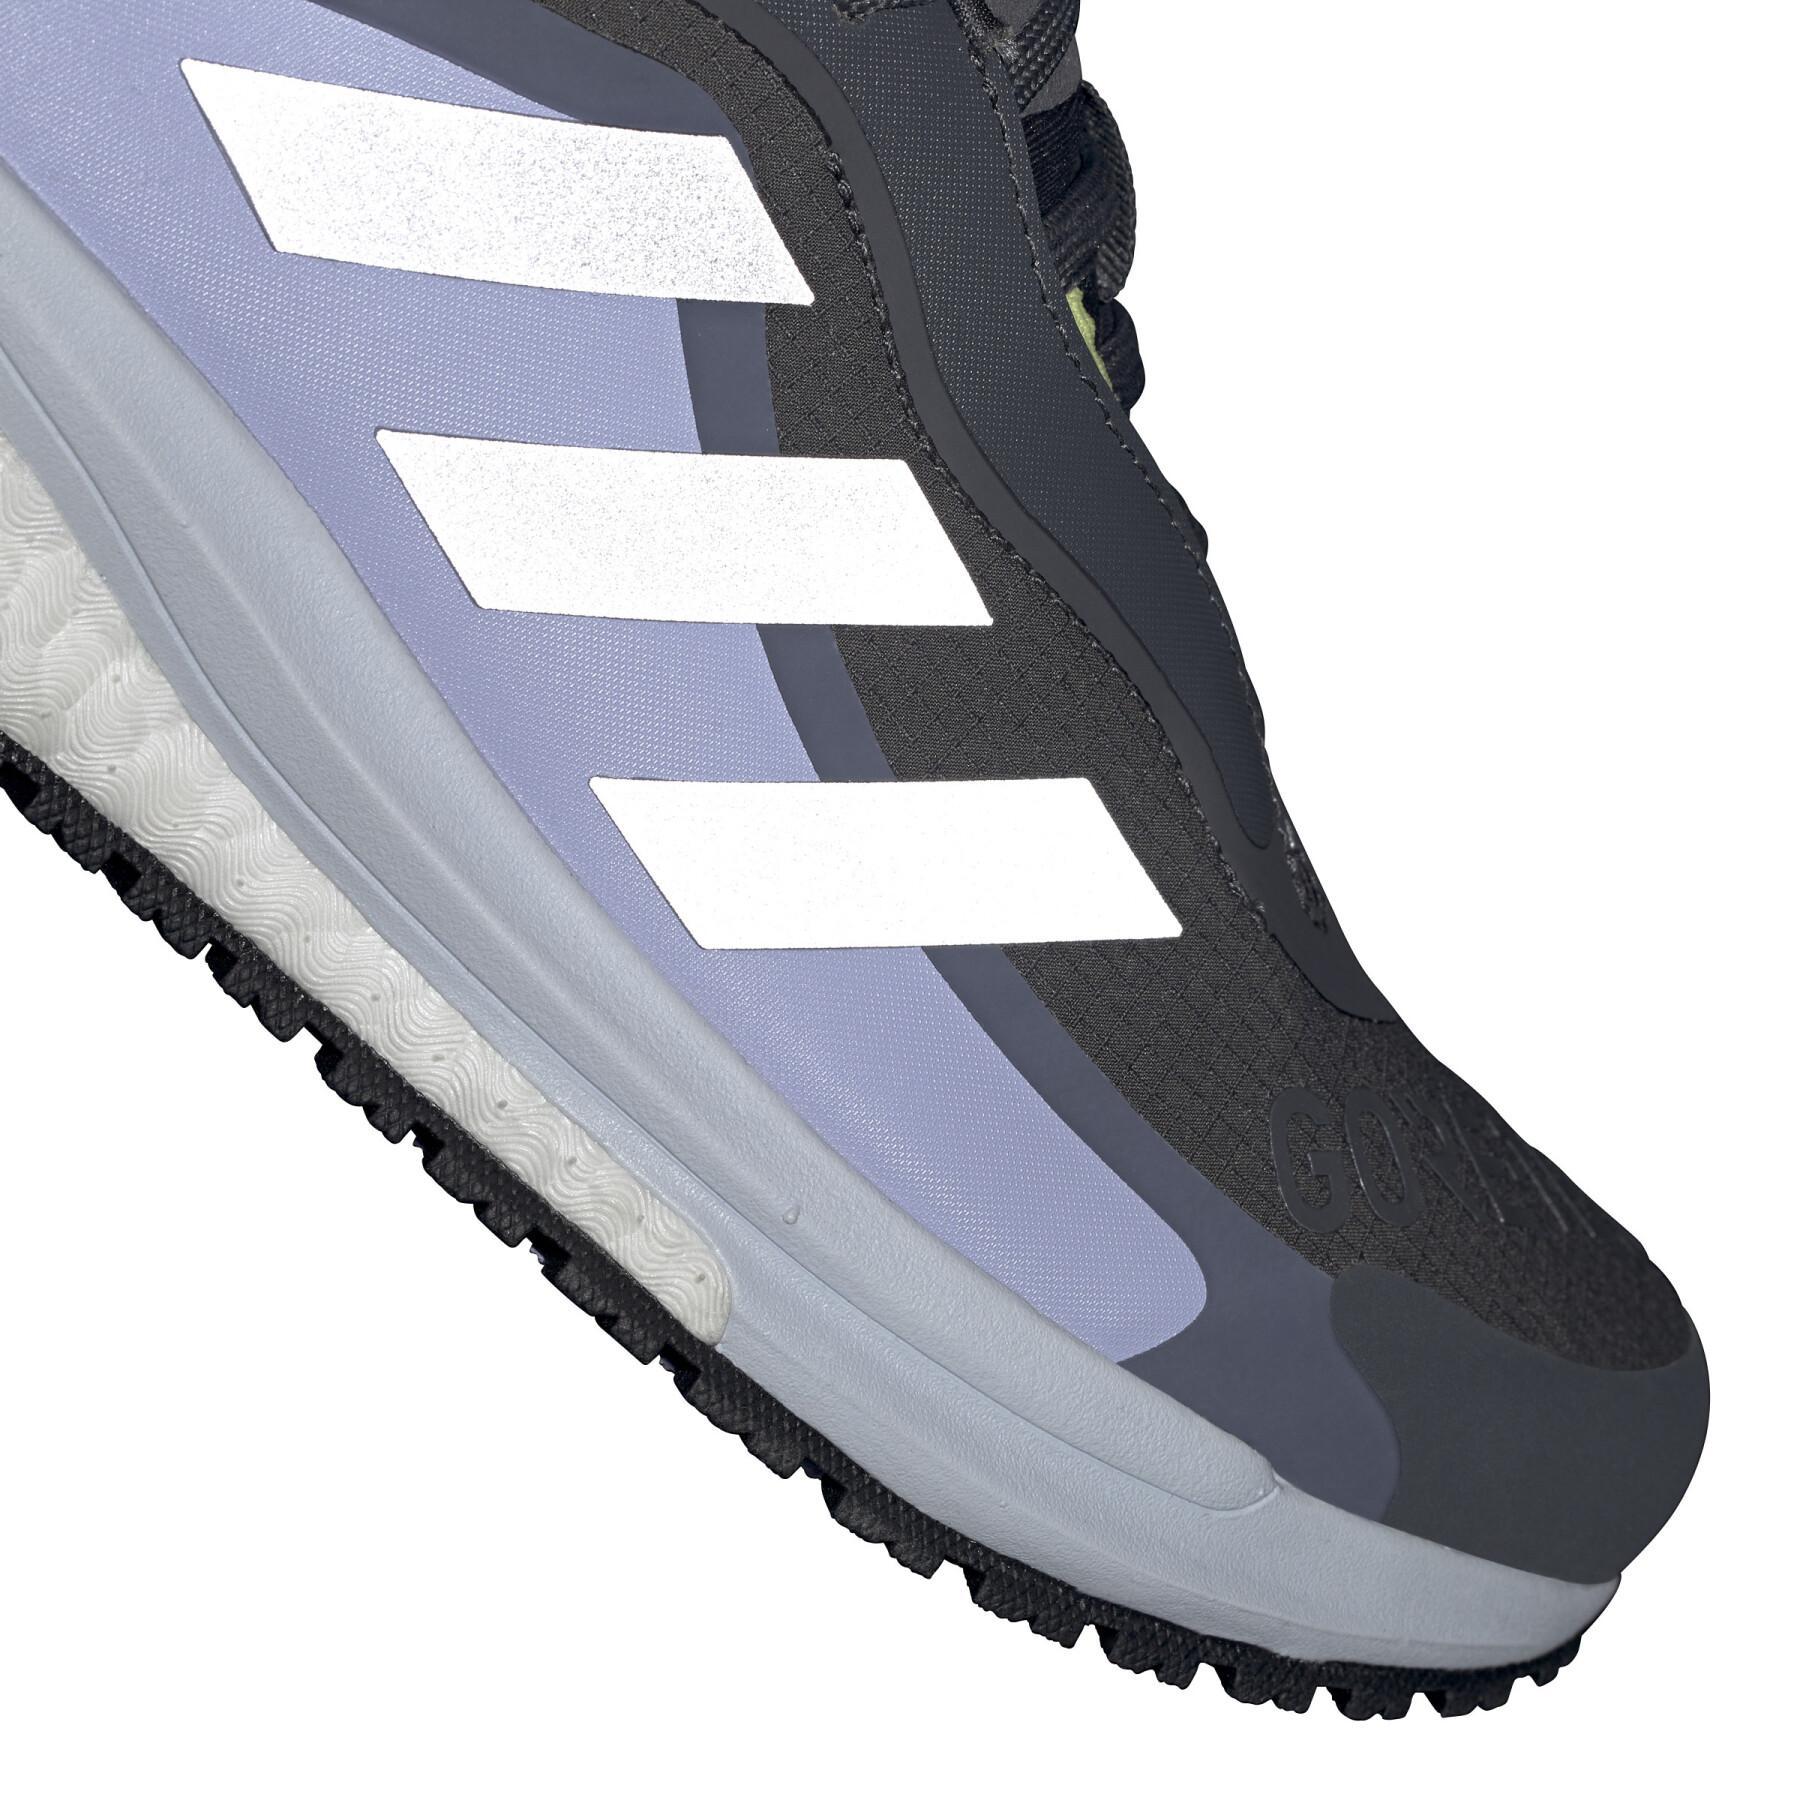 Women's shoes adidas SolarGlide 4 GORE-TEX